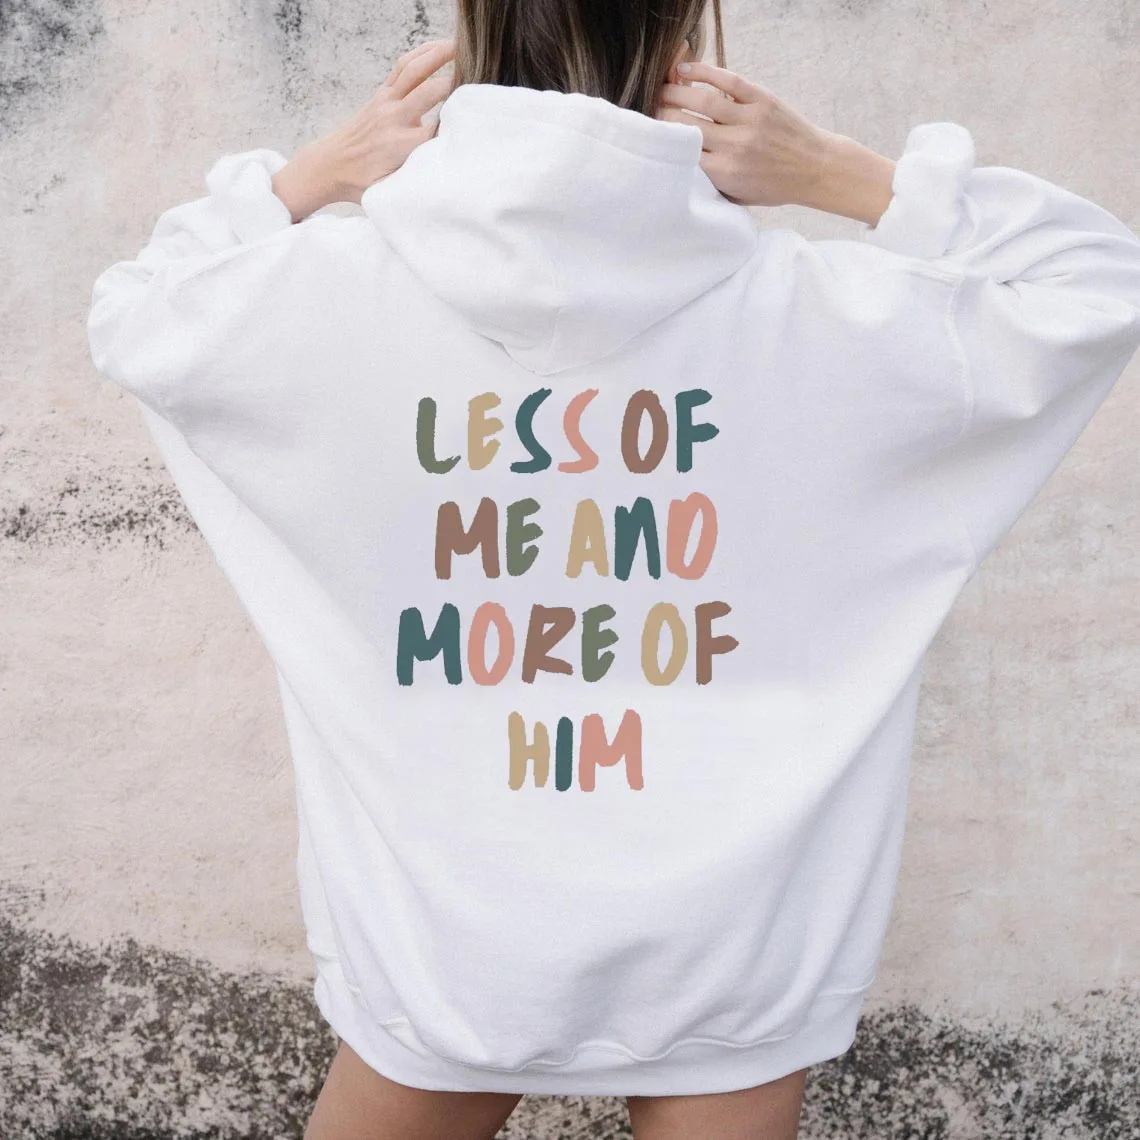 

Less of me and more of him jesus religion Christian Merch Aesthetic Clothing Faith Based pullovers vintage cotton spring tops